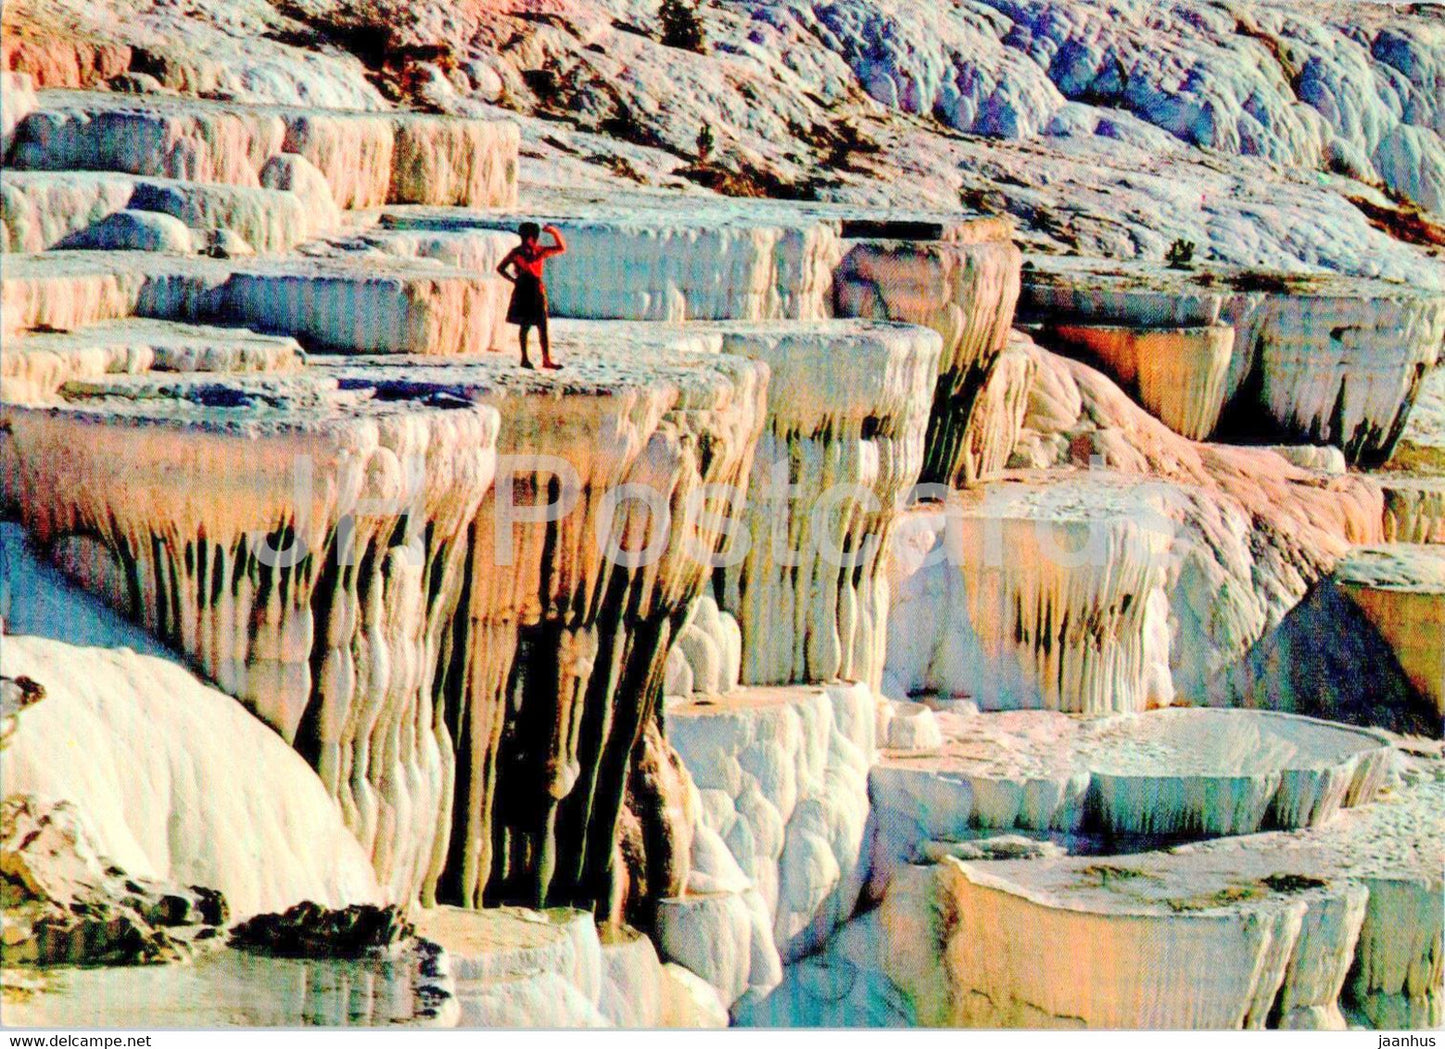 Pamukkale - Hierapolis - Calcer Formations - 20-1 - Turkey - used - JH Postcards